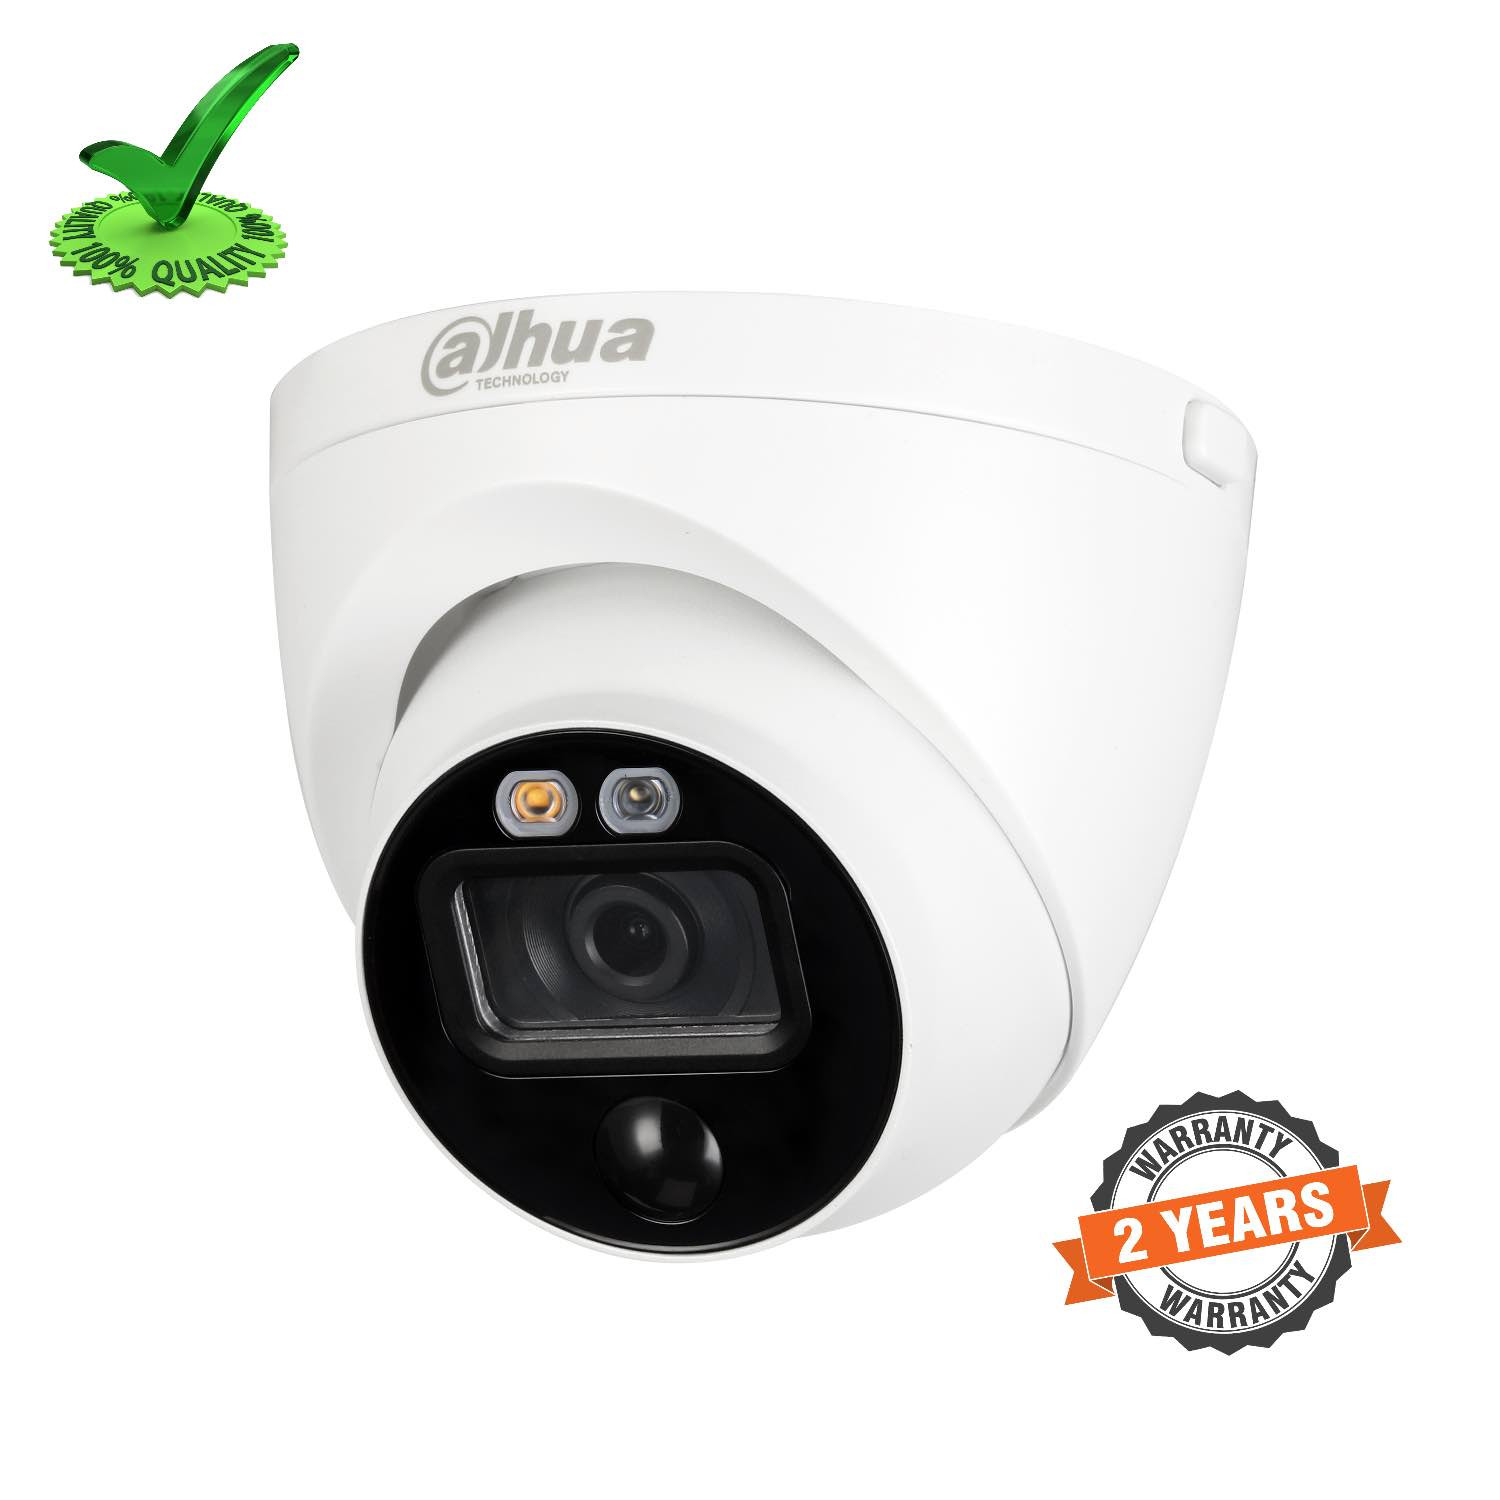 Dahua DH-HAC-ME1500EP-LED 5MP Security Active Deterrence Camera